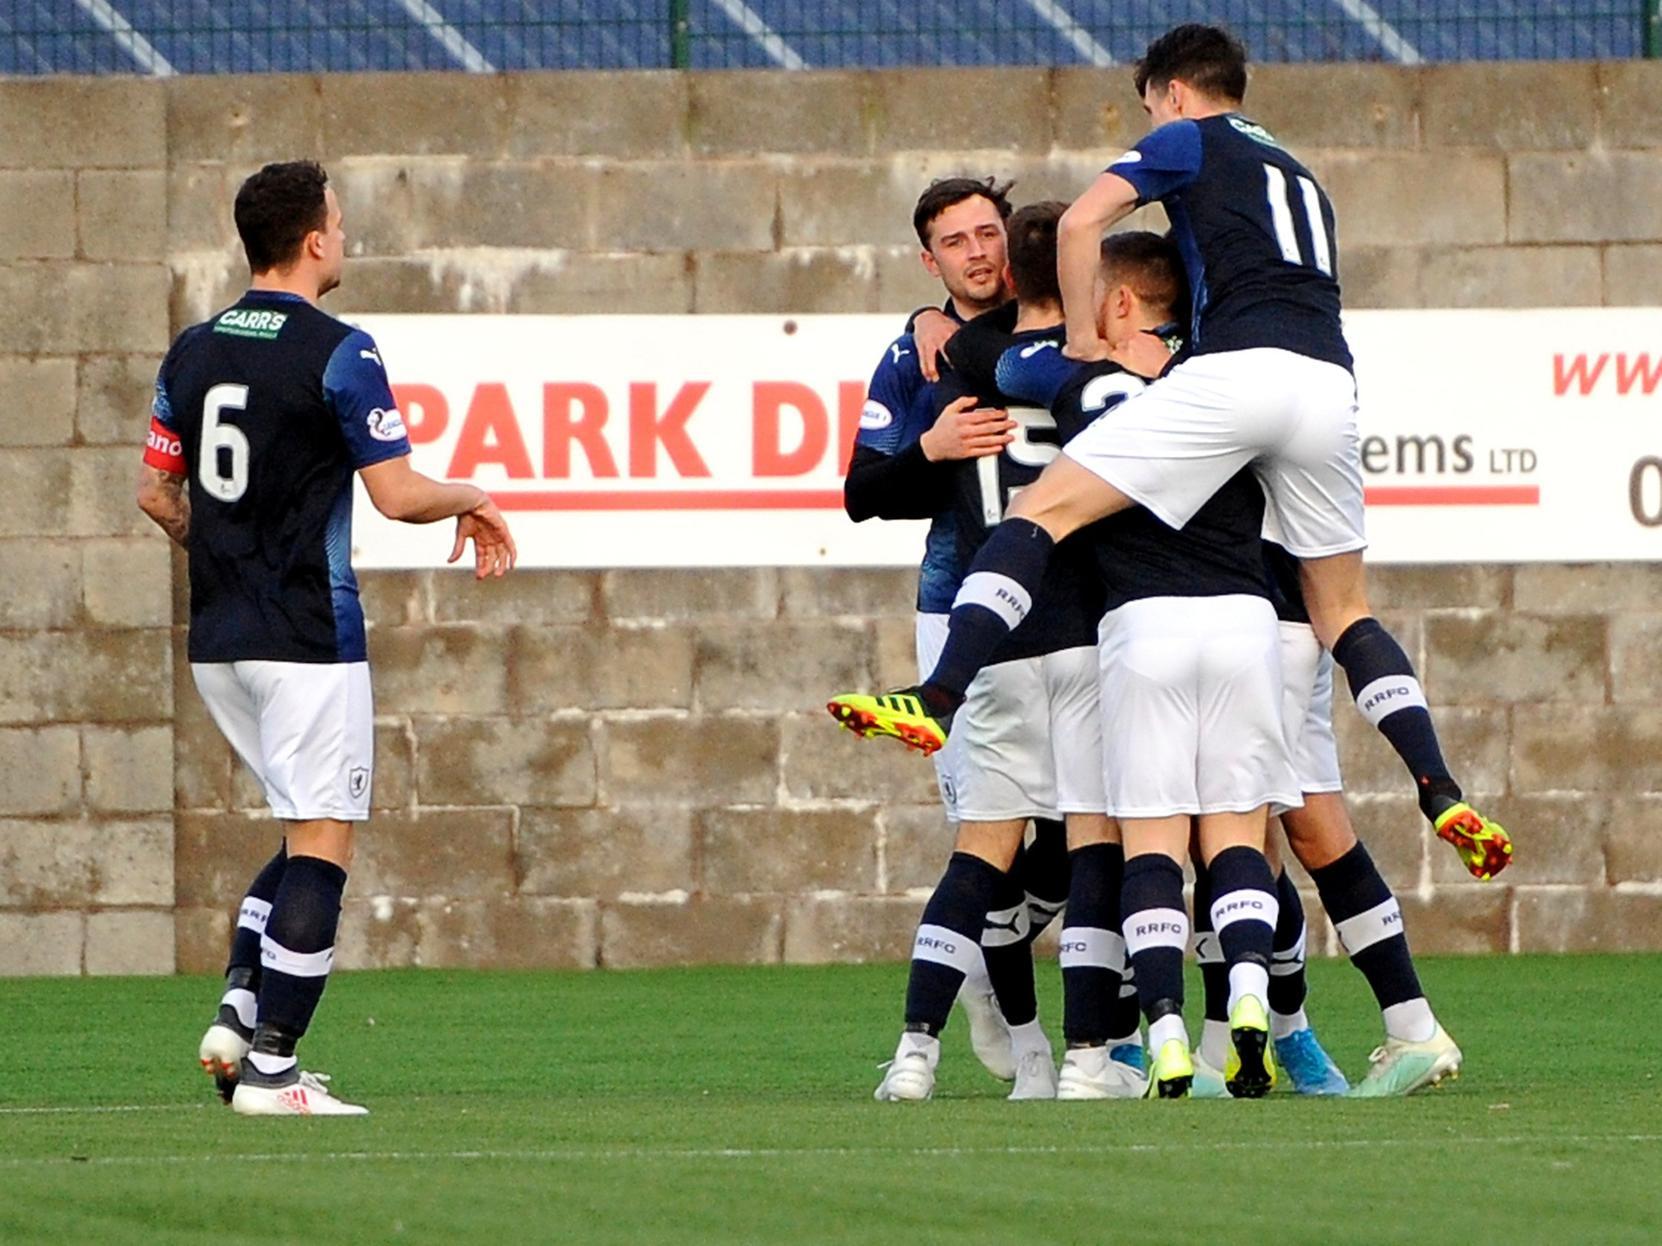 More celebrations after Raith's opening goal.